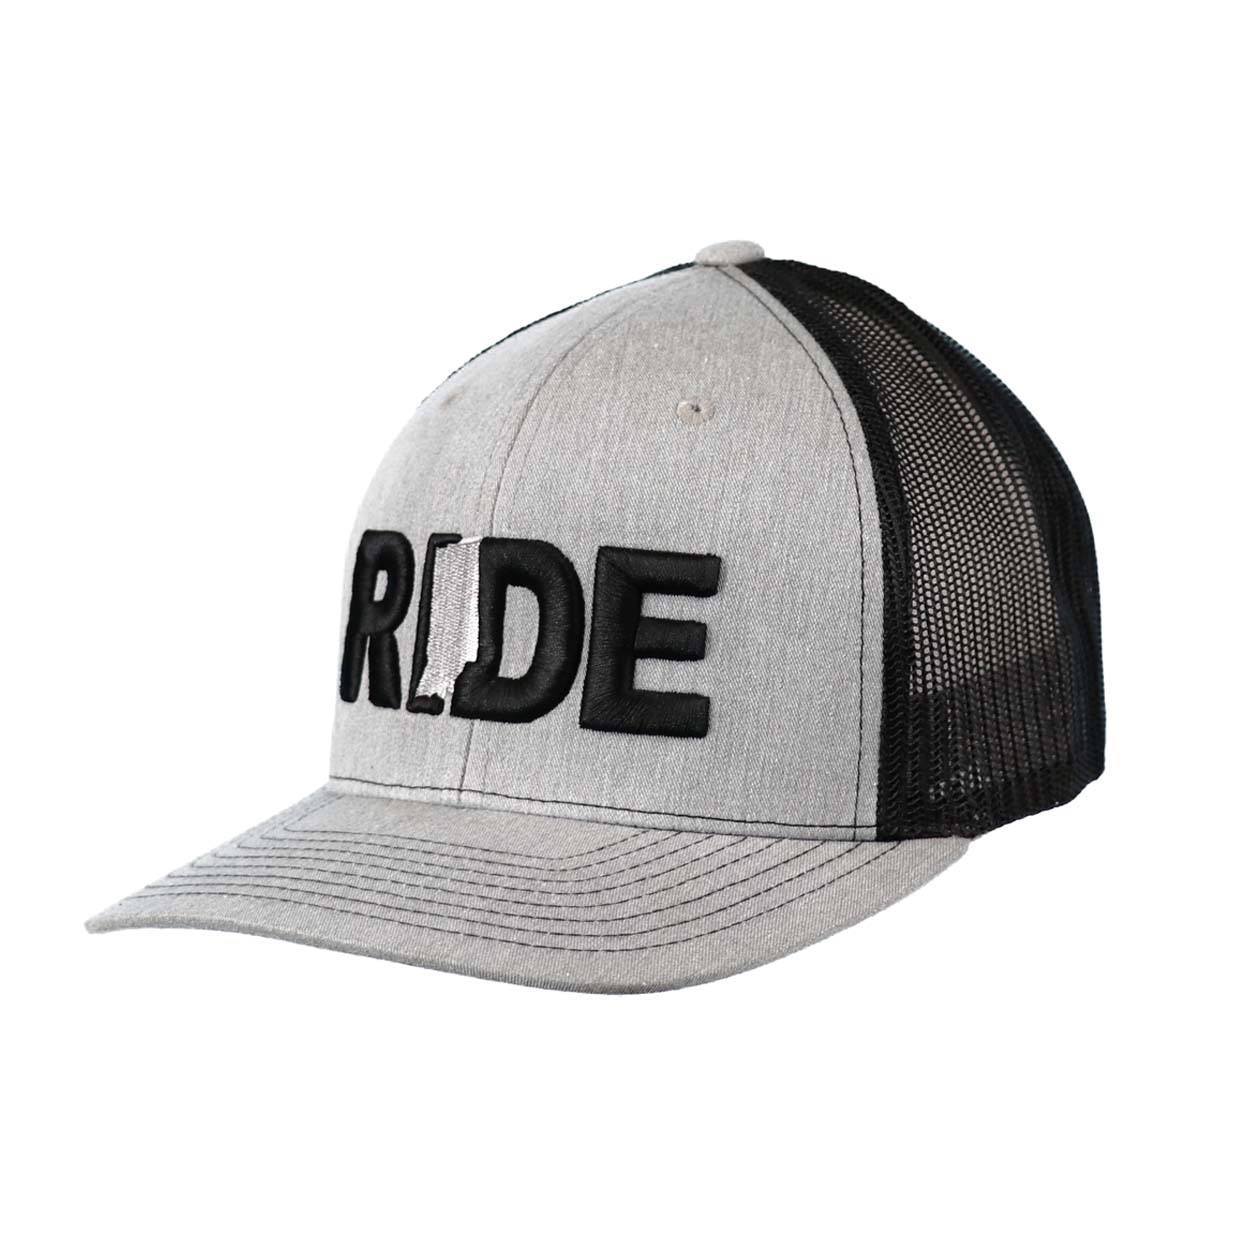 Ride Indiana Classic Embroidered Snapback Trucker Hat Heather Gray/Black